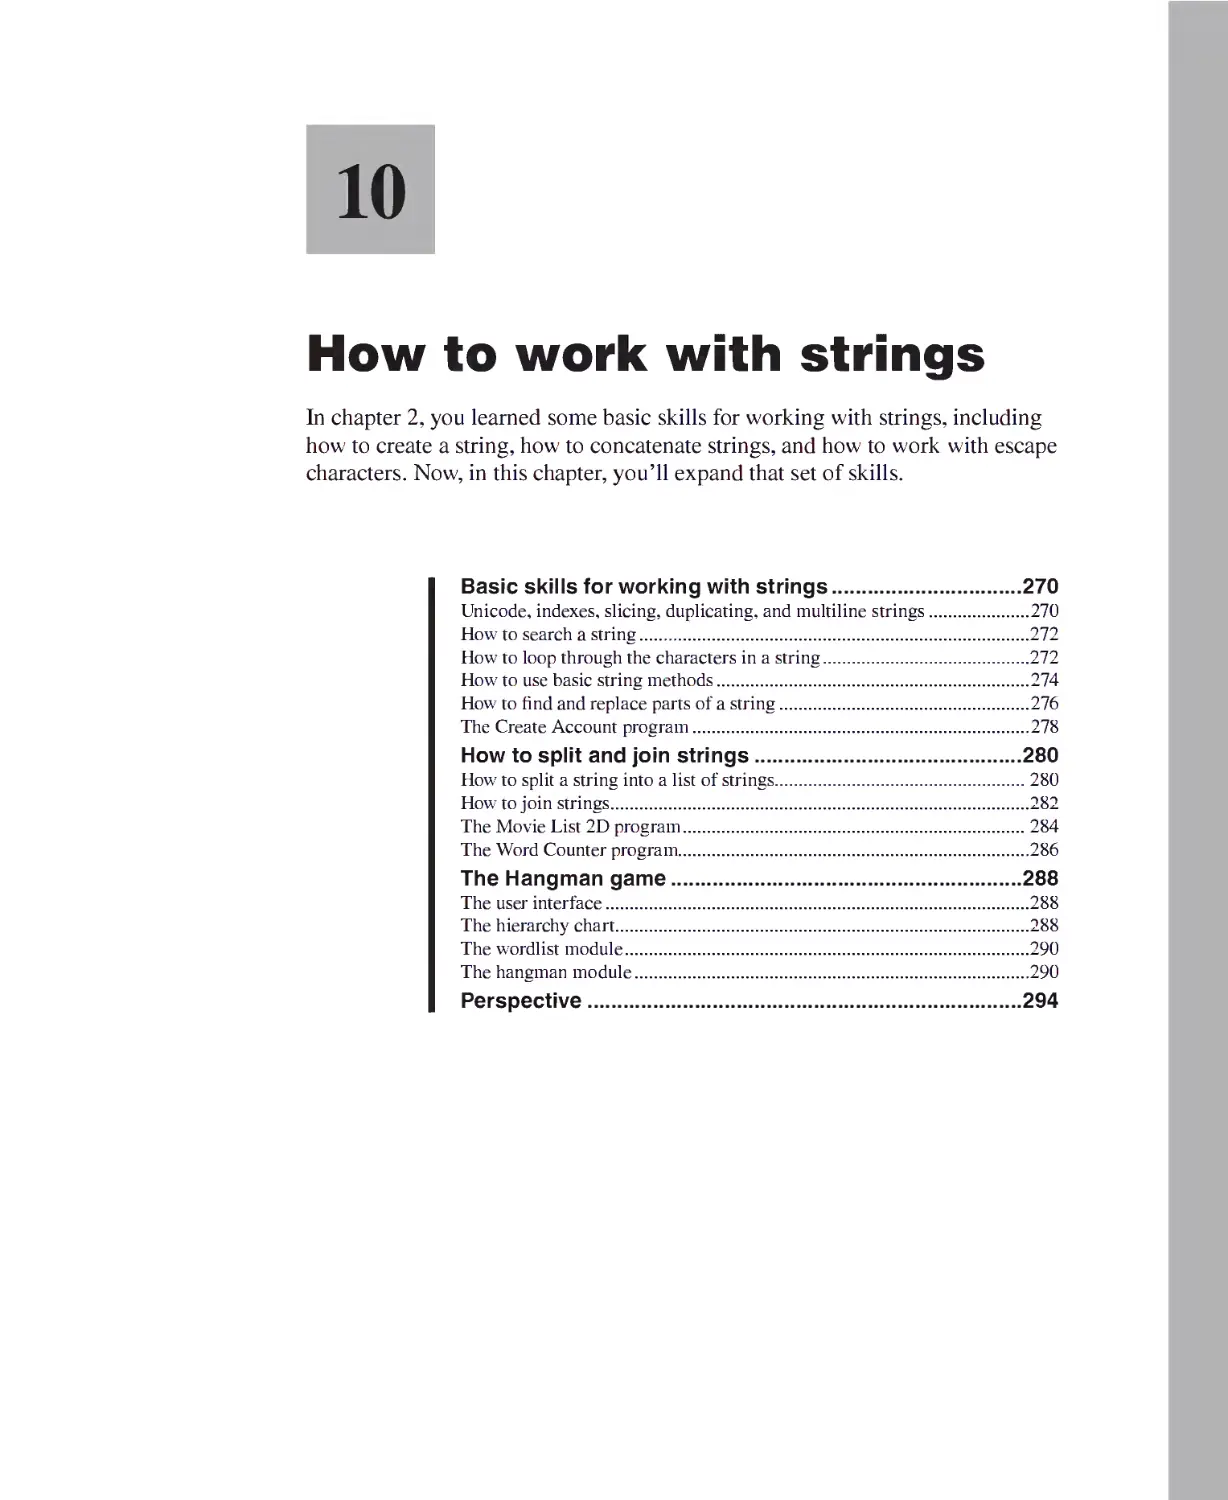 Chapter 10 - How to Work with Strings